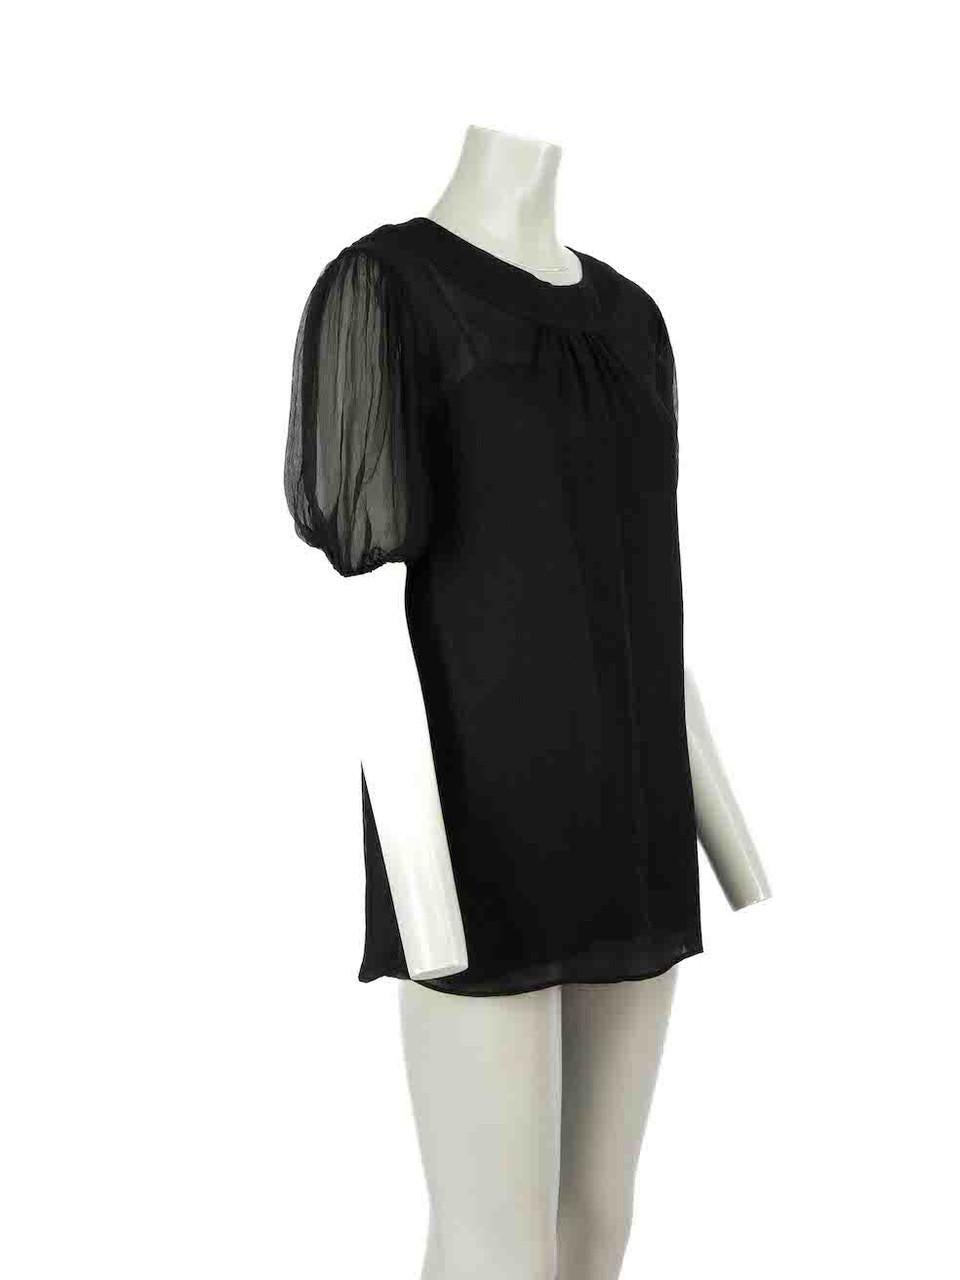 CONDITION is Very good. Minimal wear to blouse is evident. Minimal wear to the right sleeve with sticky residue and there is a small hole at the rear on this used Prada designer resale item. The composition label has been removed.
 
 Details
 Black
